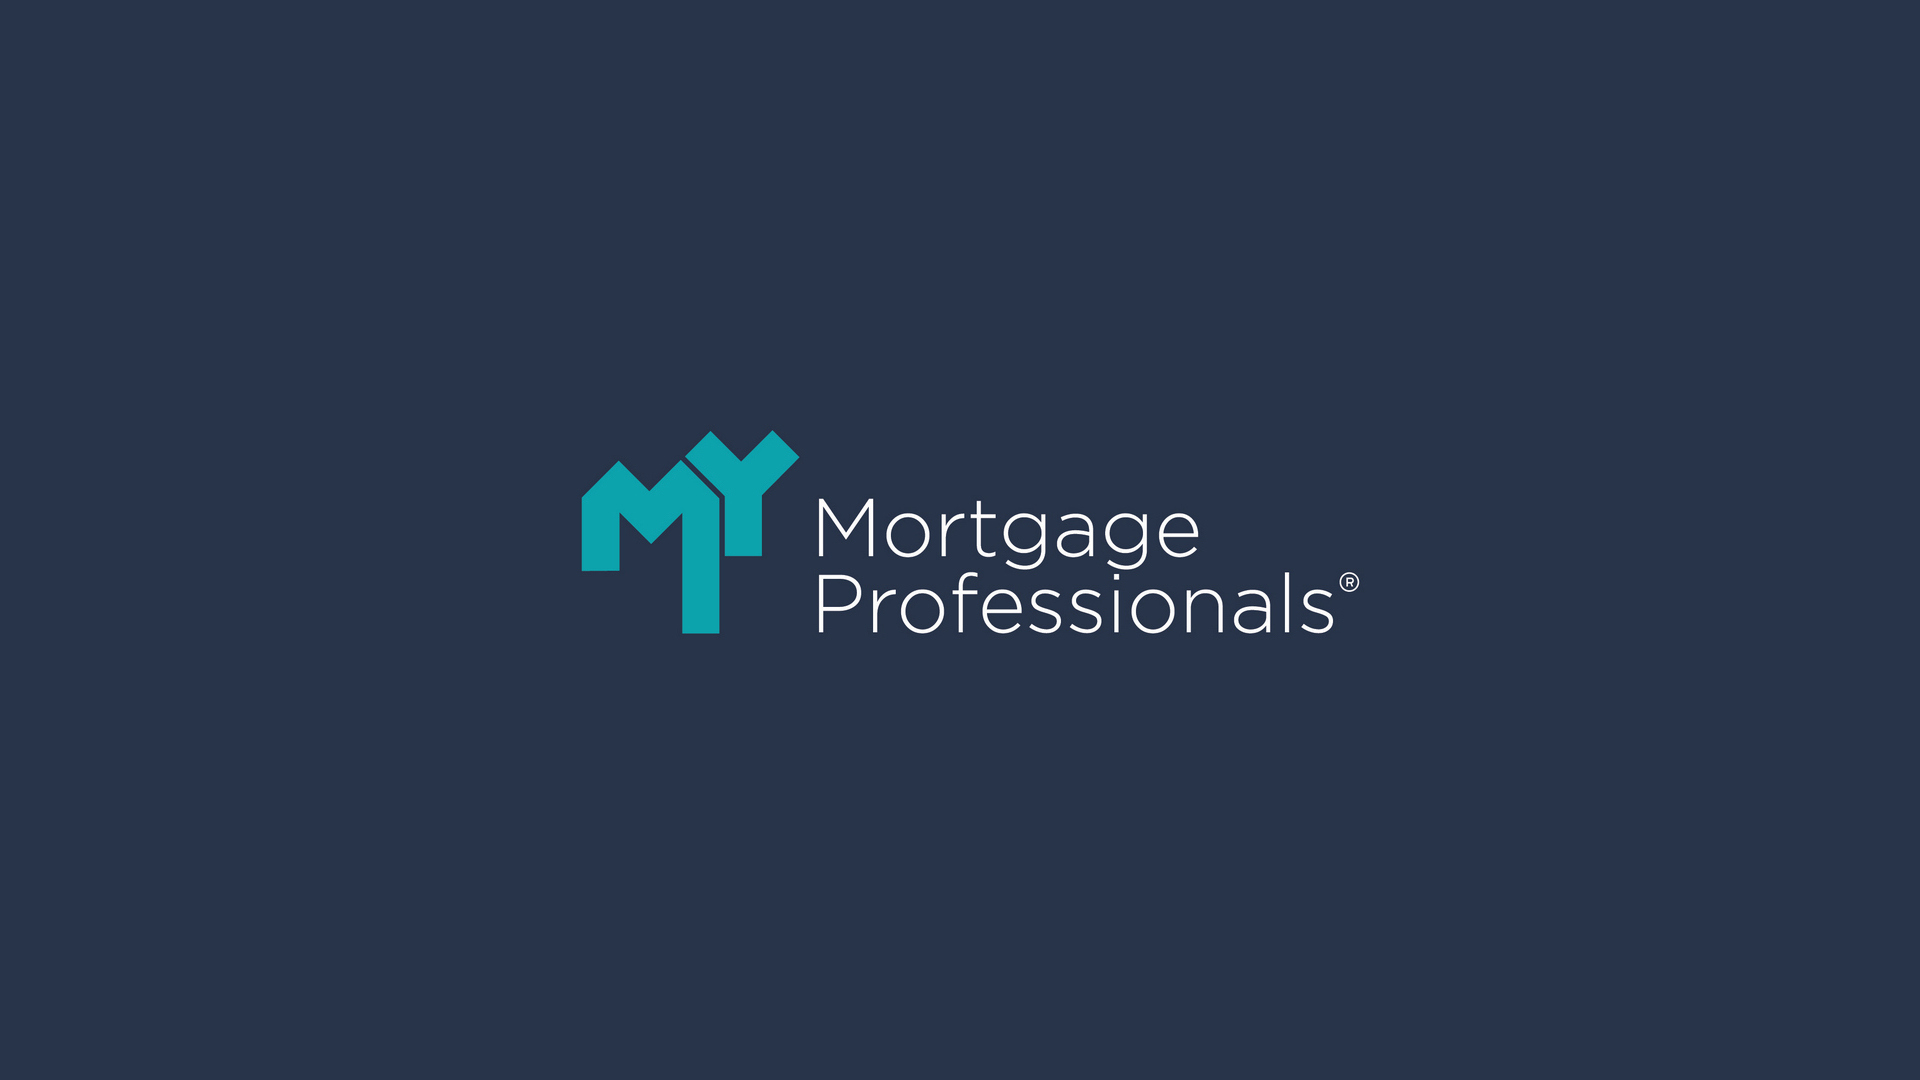 My Mortgage Professionals Glenmore Park 0418 119 118